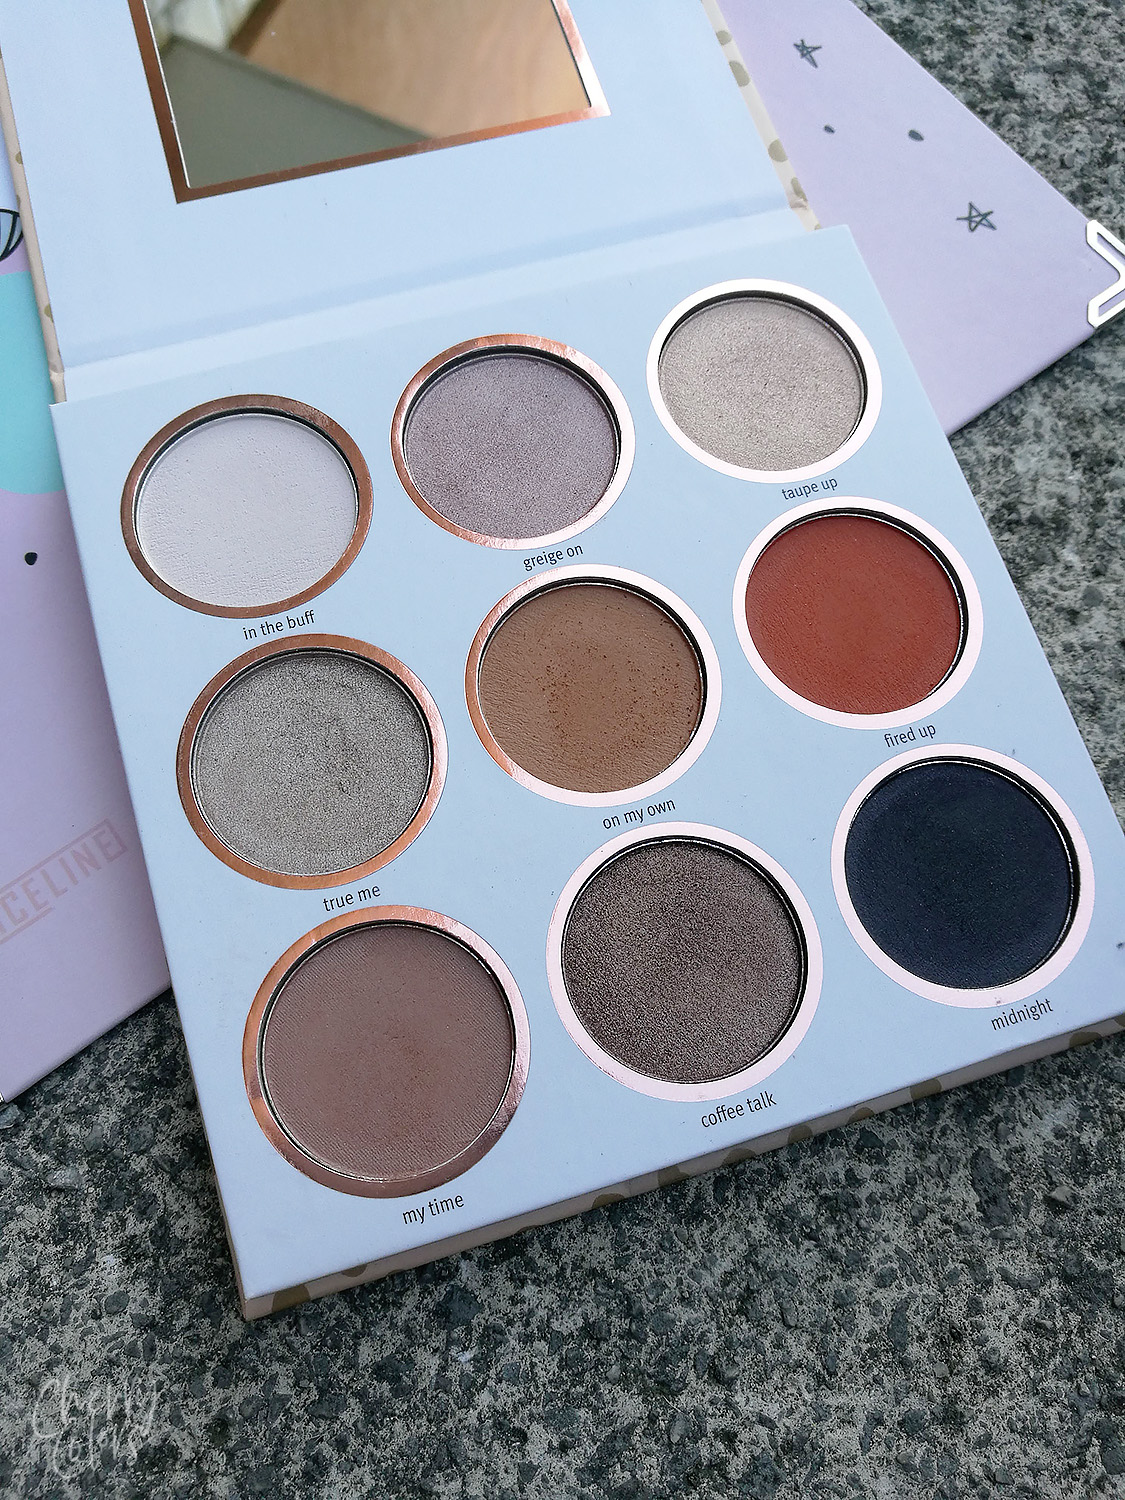 ESSENCE BE YOU TIFUL PALETTE 